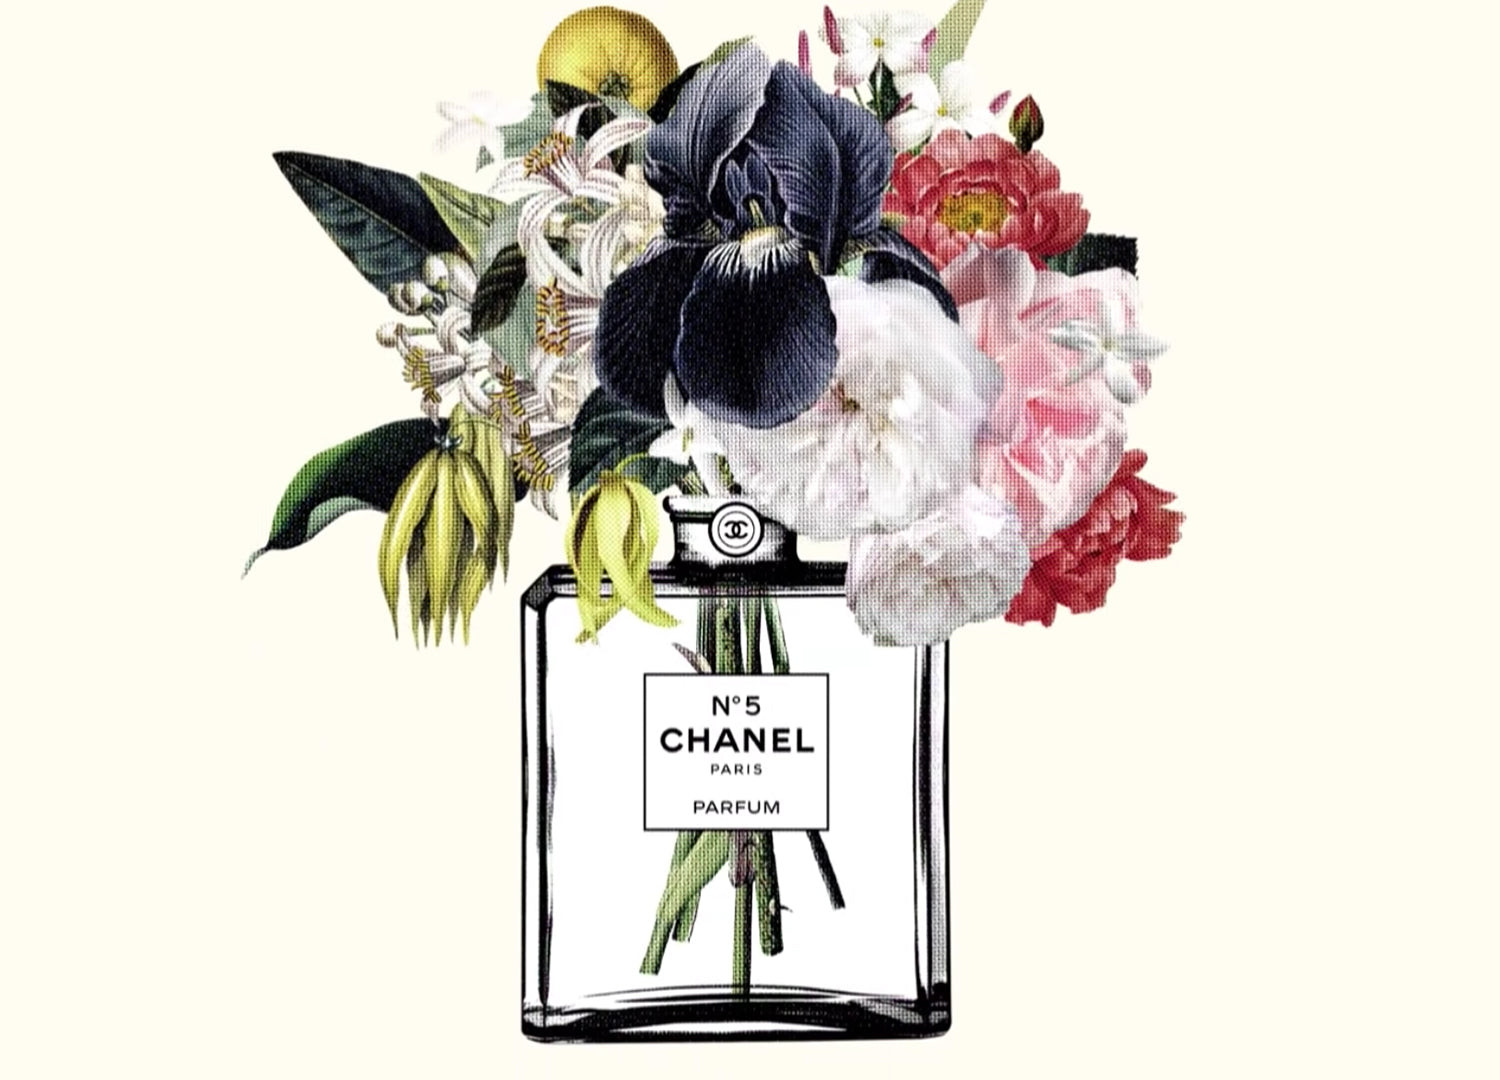 Chanel celebrates the iconic No. 5 fragrance's centennial by